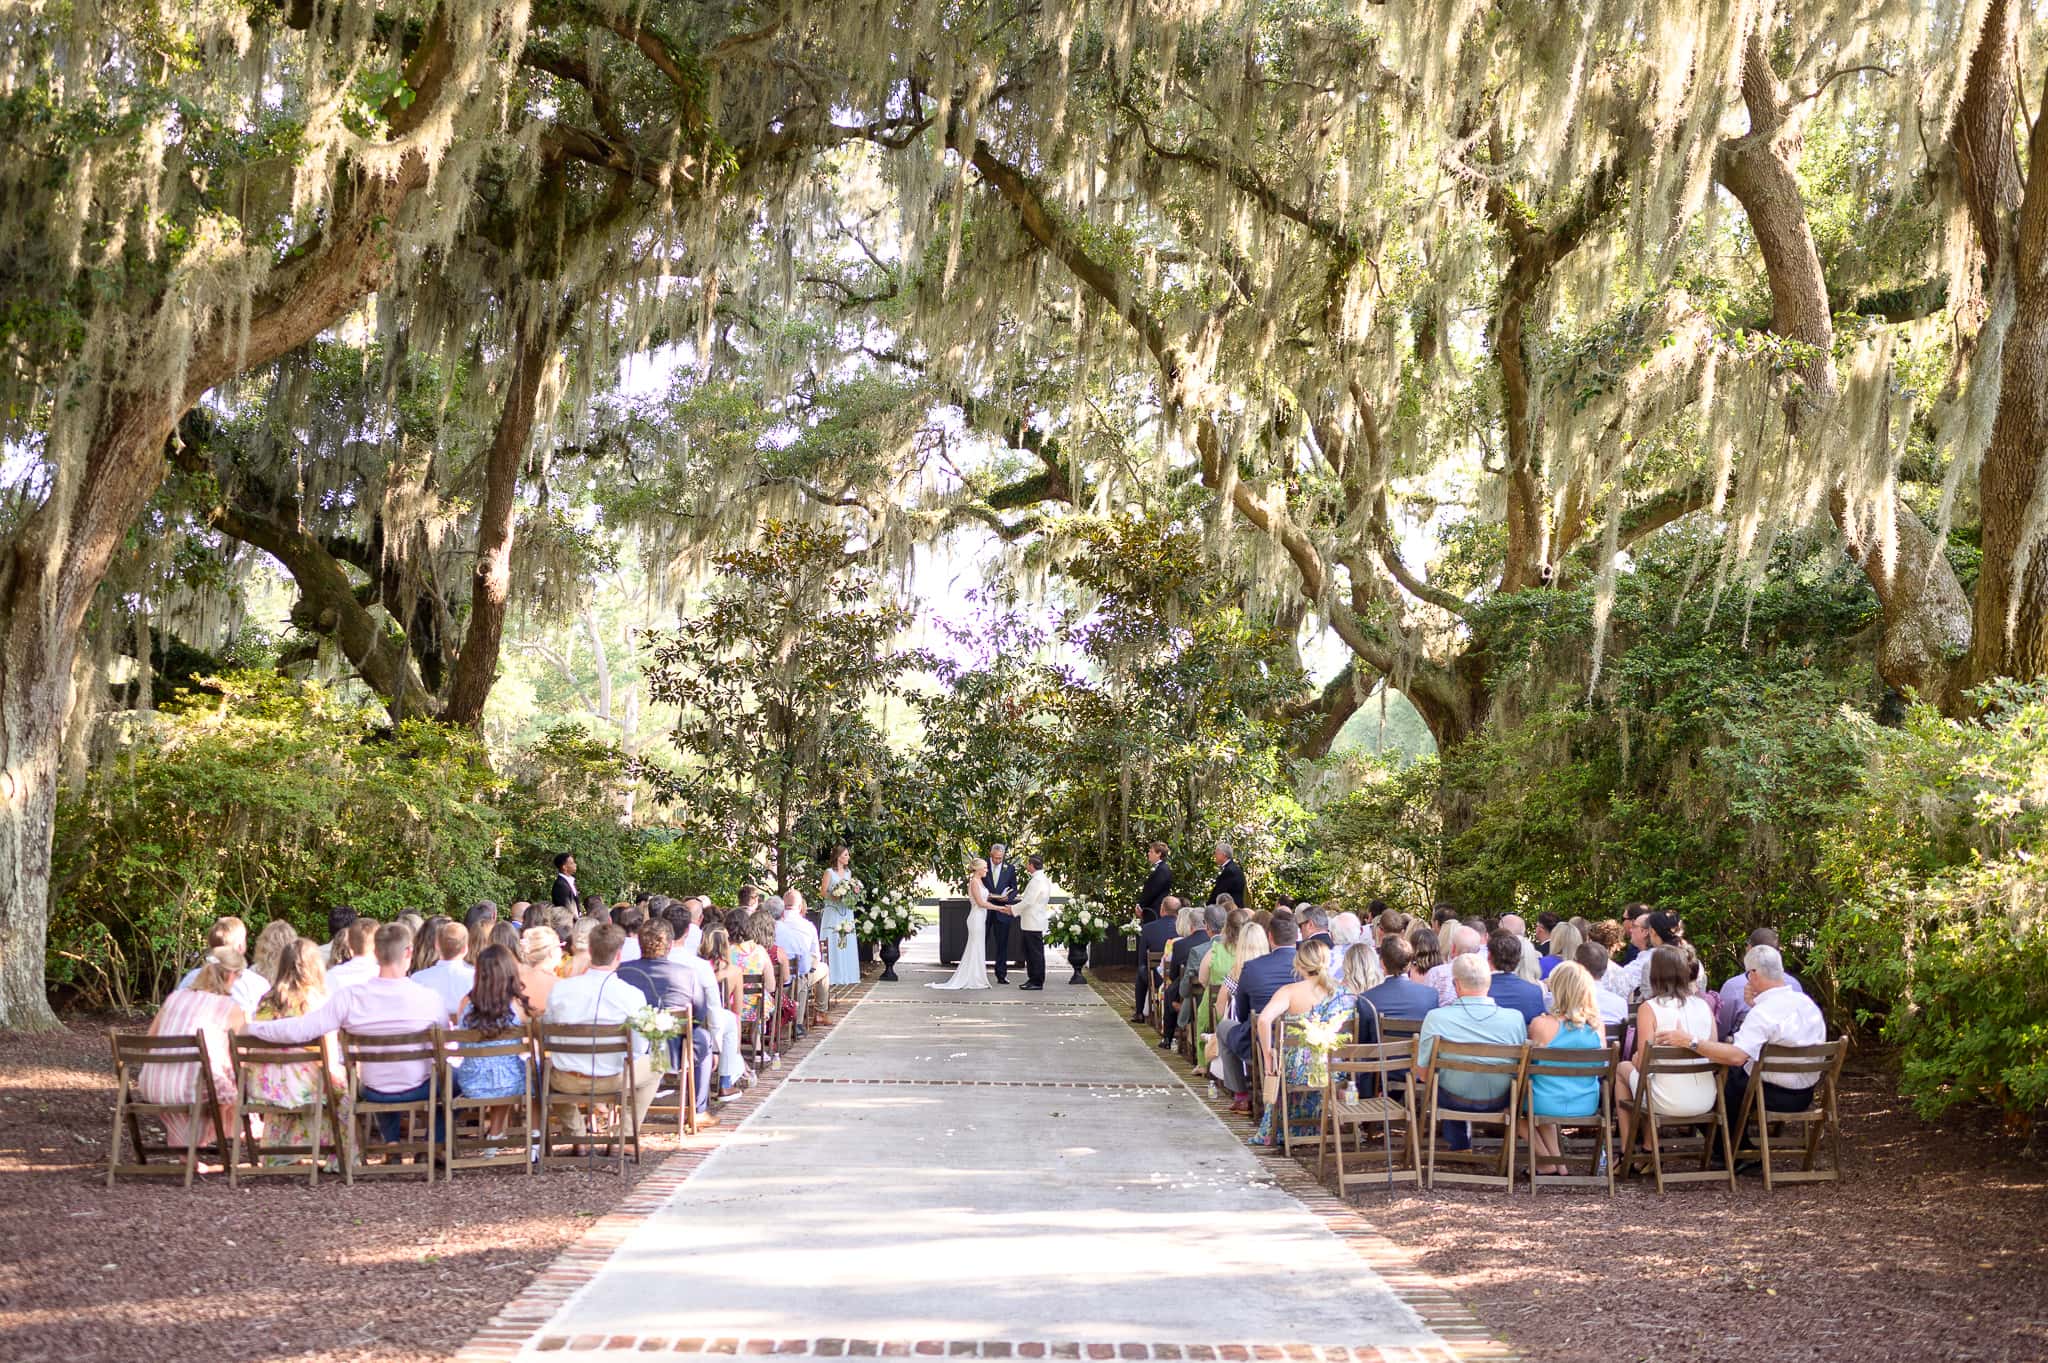 Beautiful location for the wedding ceremony under the oak trees - Caledonia Golf & Fish Club